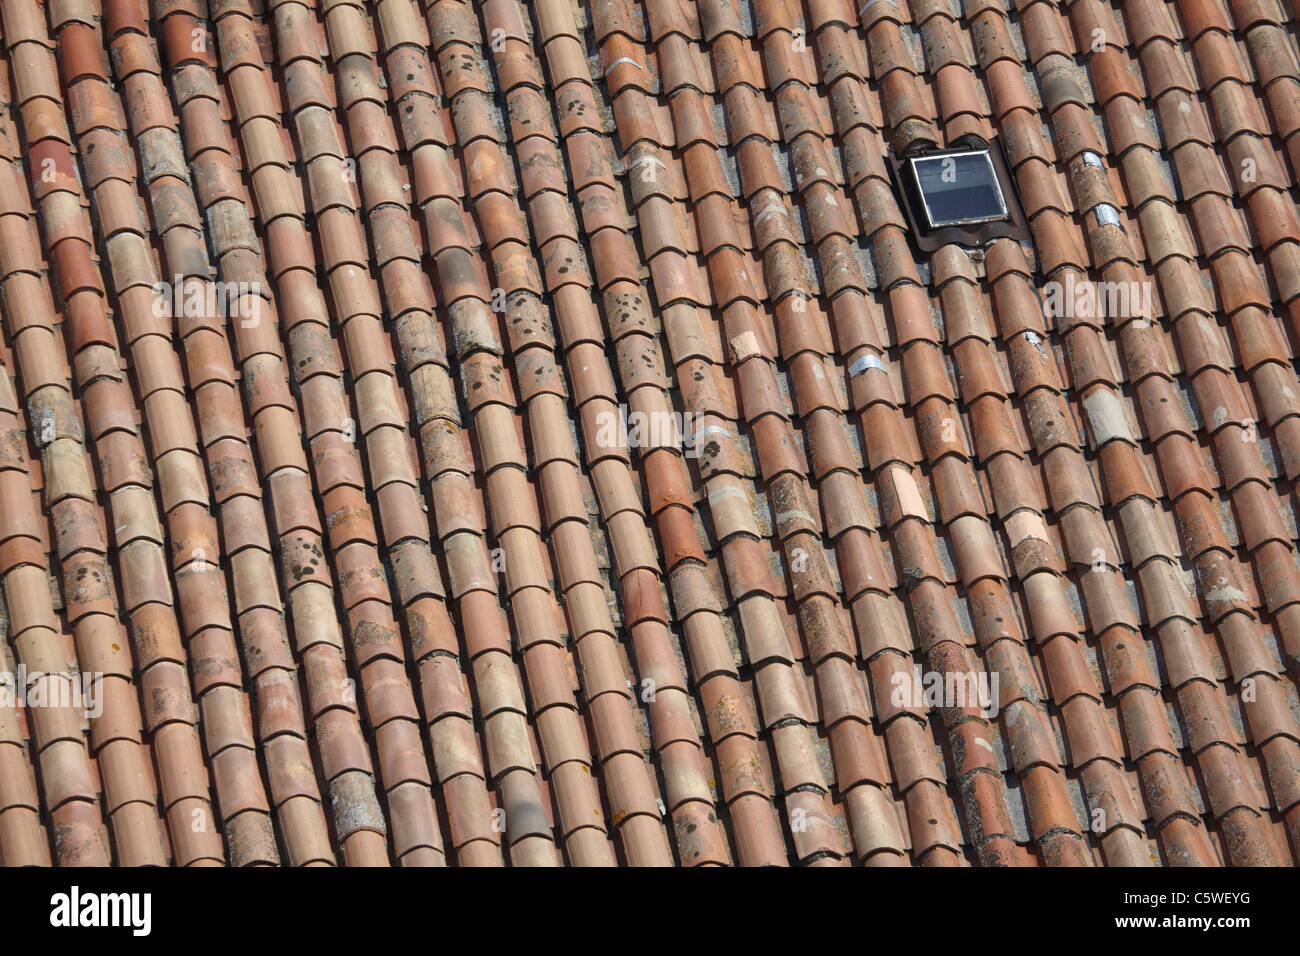 France, Tiled roof and dormer window Stock Photo